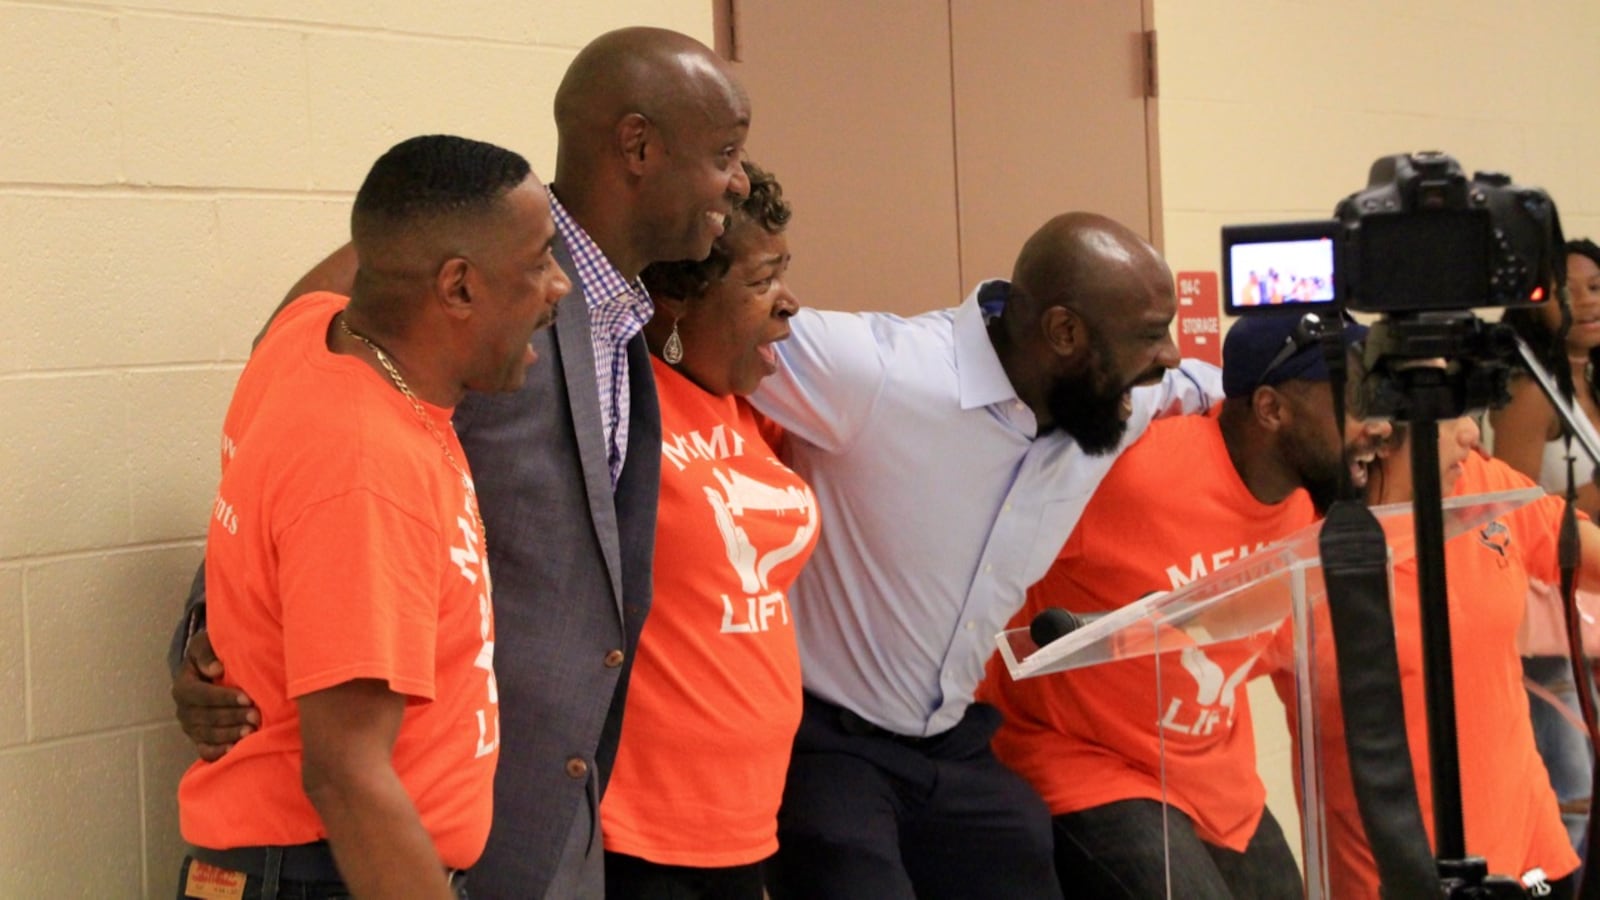 Leaders of Memphis Lift take literally Superintendent Dorsey Hopson’s call to “lock arms and work together” following Hopson’s presentation to the parent advocacy group in July 2017.